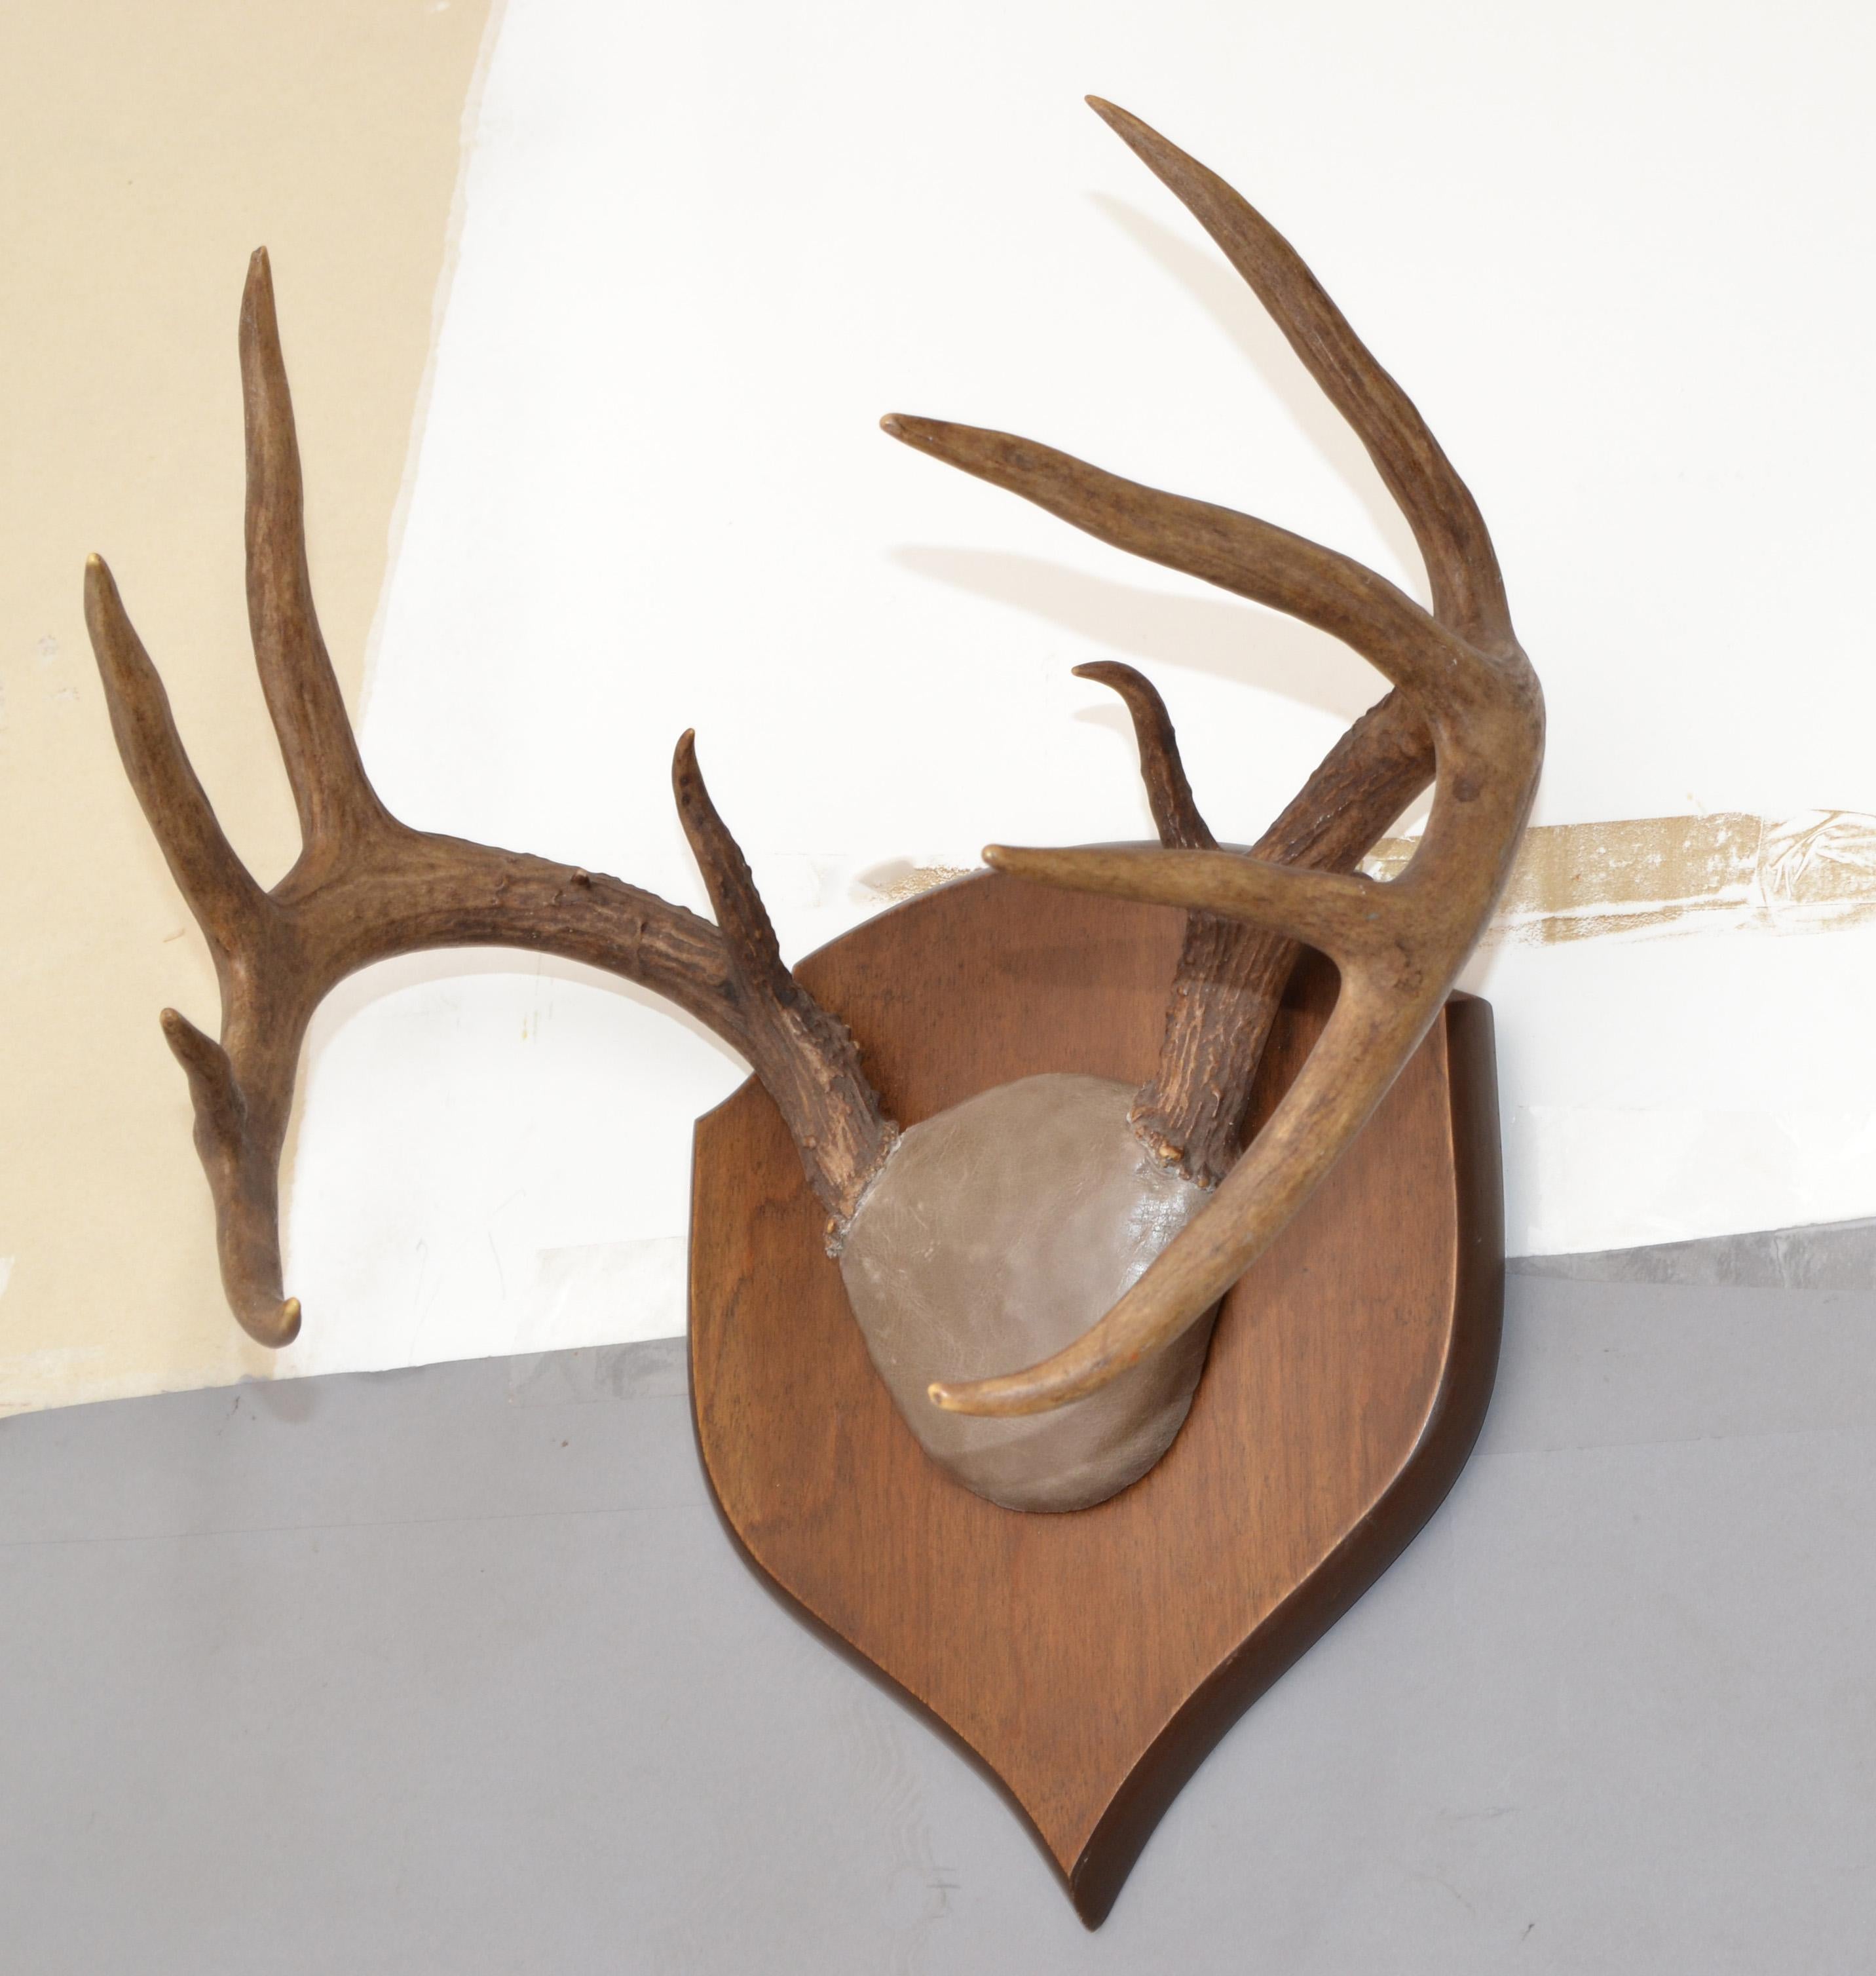 Mid-Century Modern white tail deer buck antlers, horns on a dark brown wooden wall-mounted plaque.
Great Taxidermy Plaque Mount, wall sculpture for hunters.